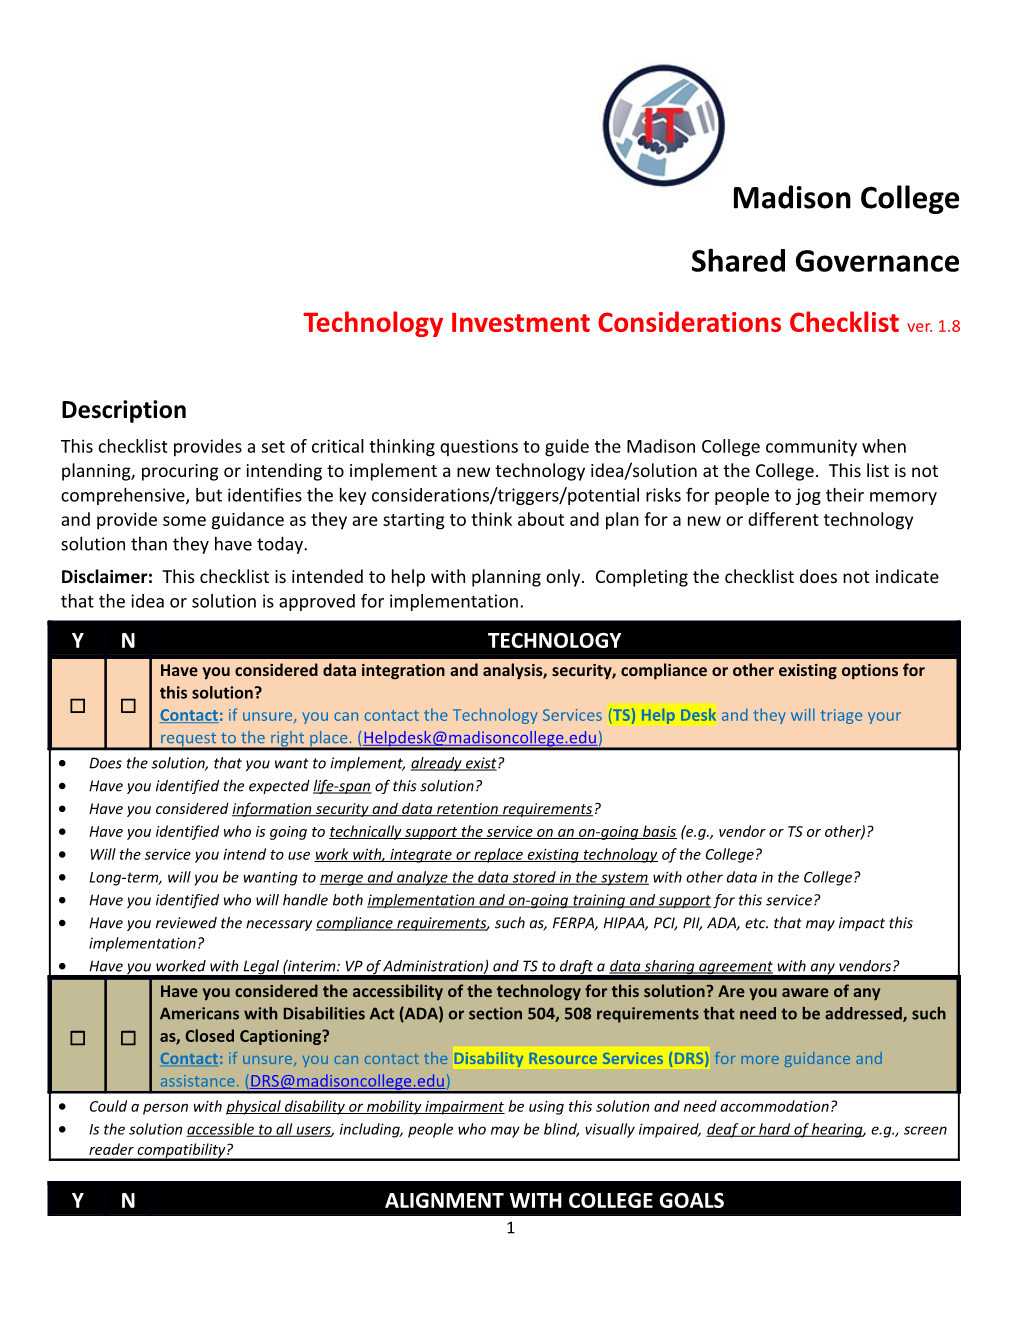 This Checklist Provides a Set of Critical Thinking Questions to Guide the Madison College